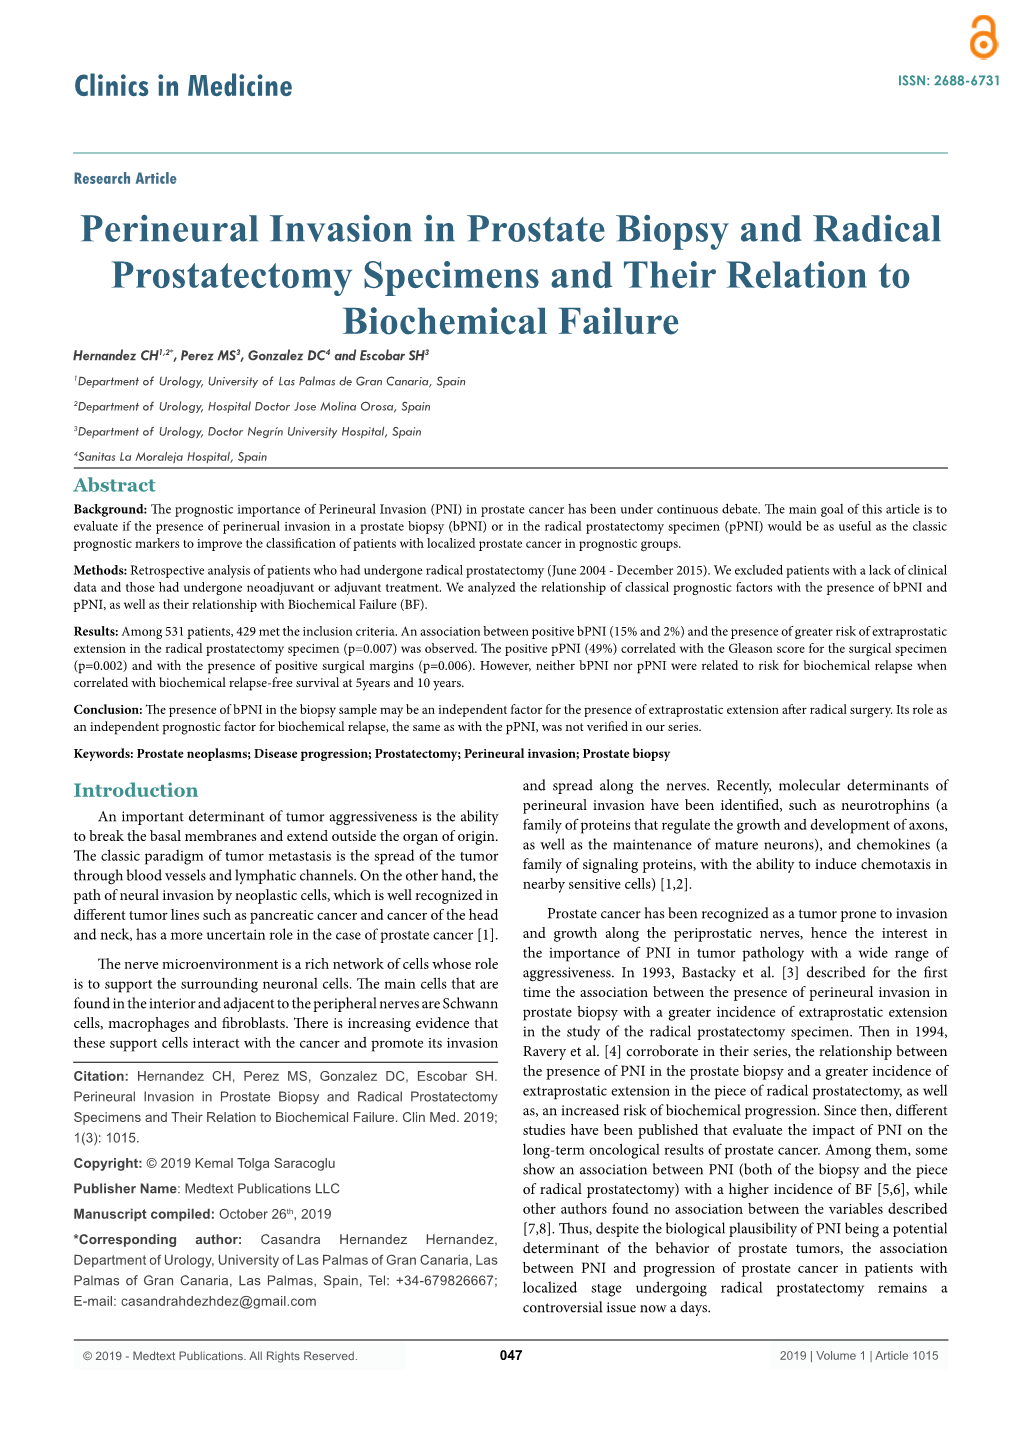 Perineural Invasion in Prostate Biopsy and Radical Prostatectomy Specimens and Their Relation to Biochemical Failure